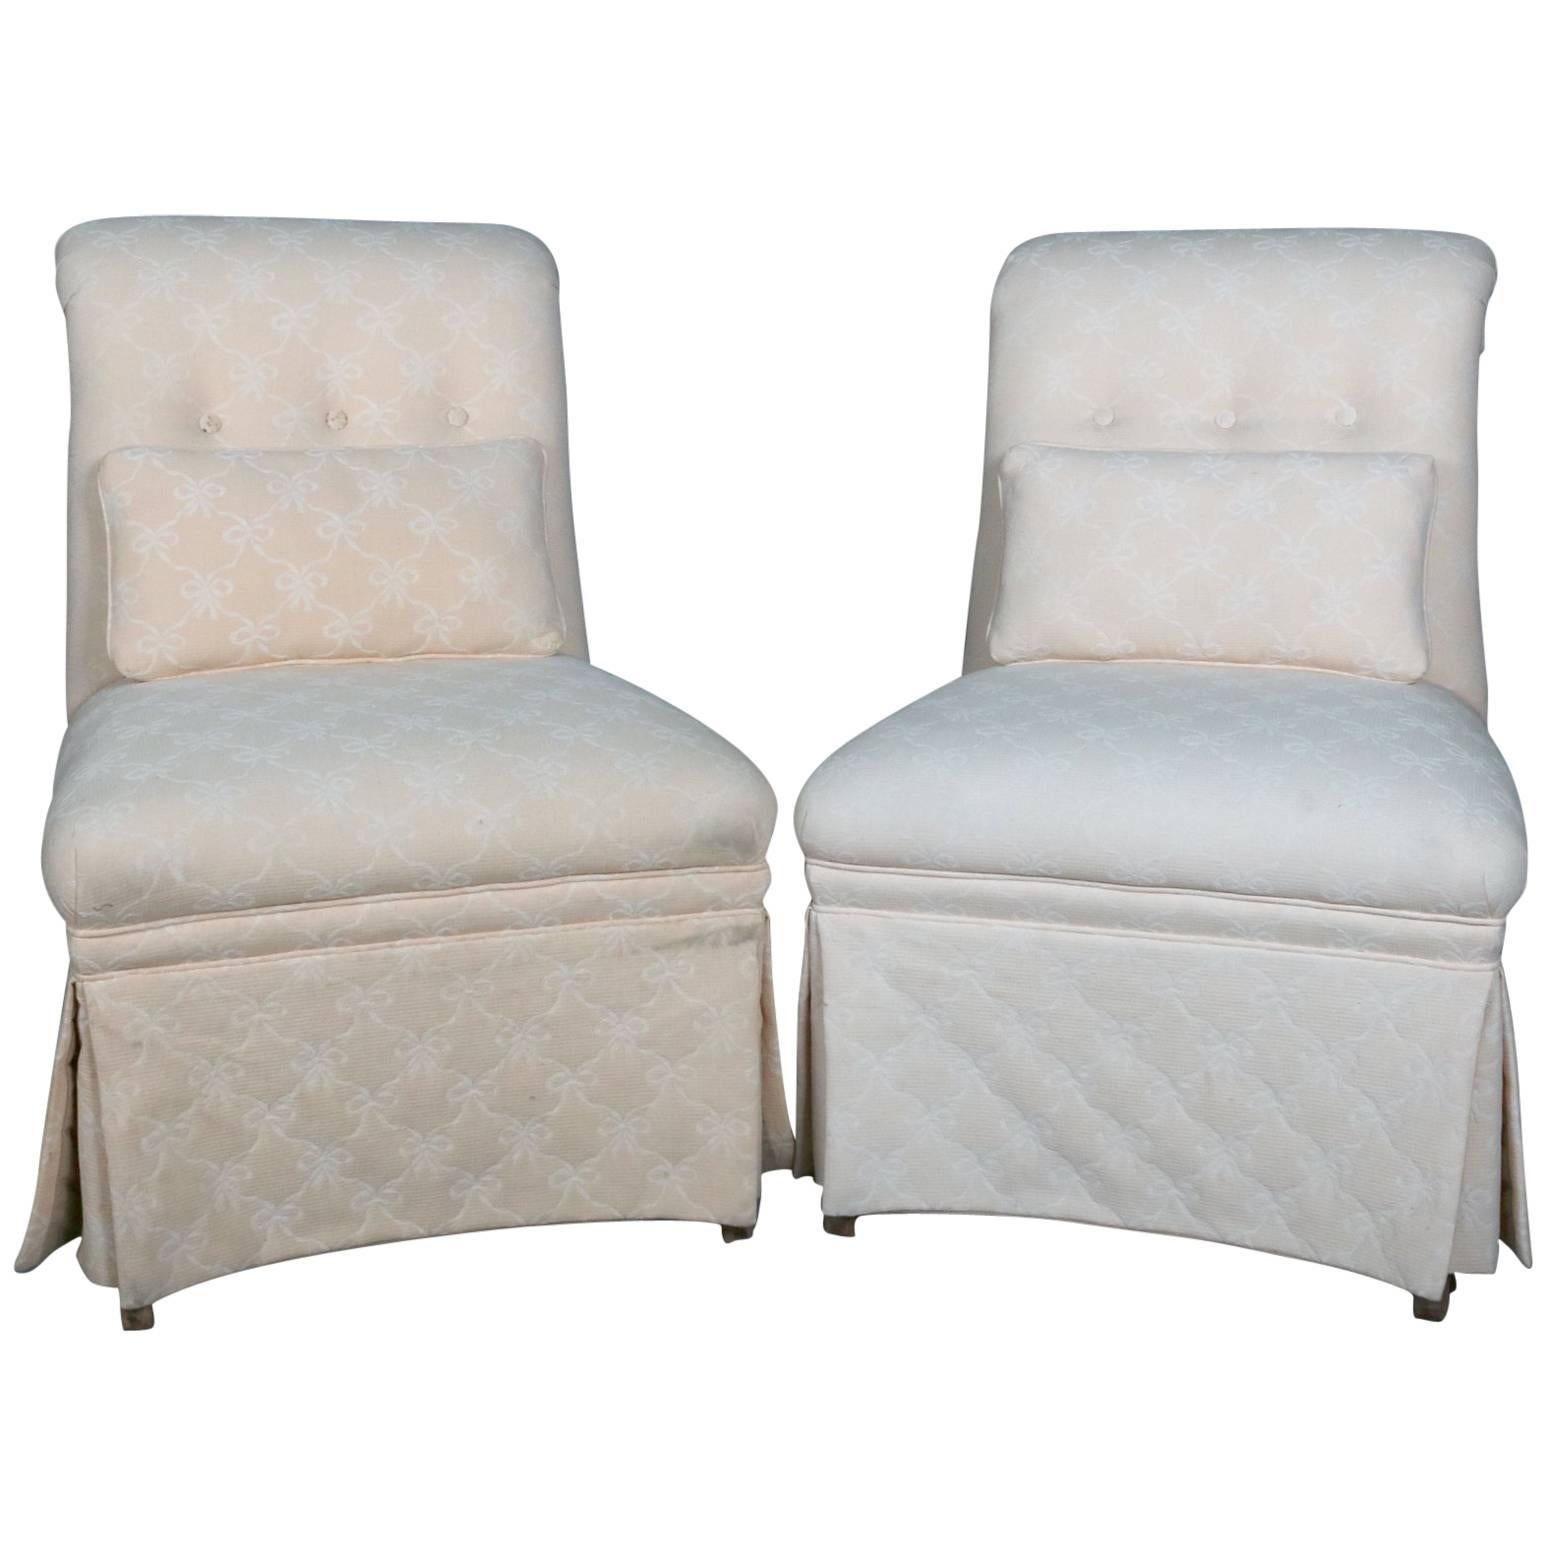 Pair of Vintage Petite Scroll Back Upholstered Slipper Chairs, 20th Century